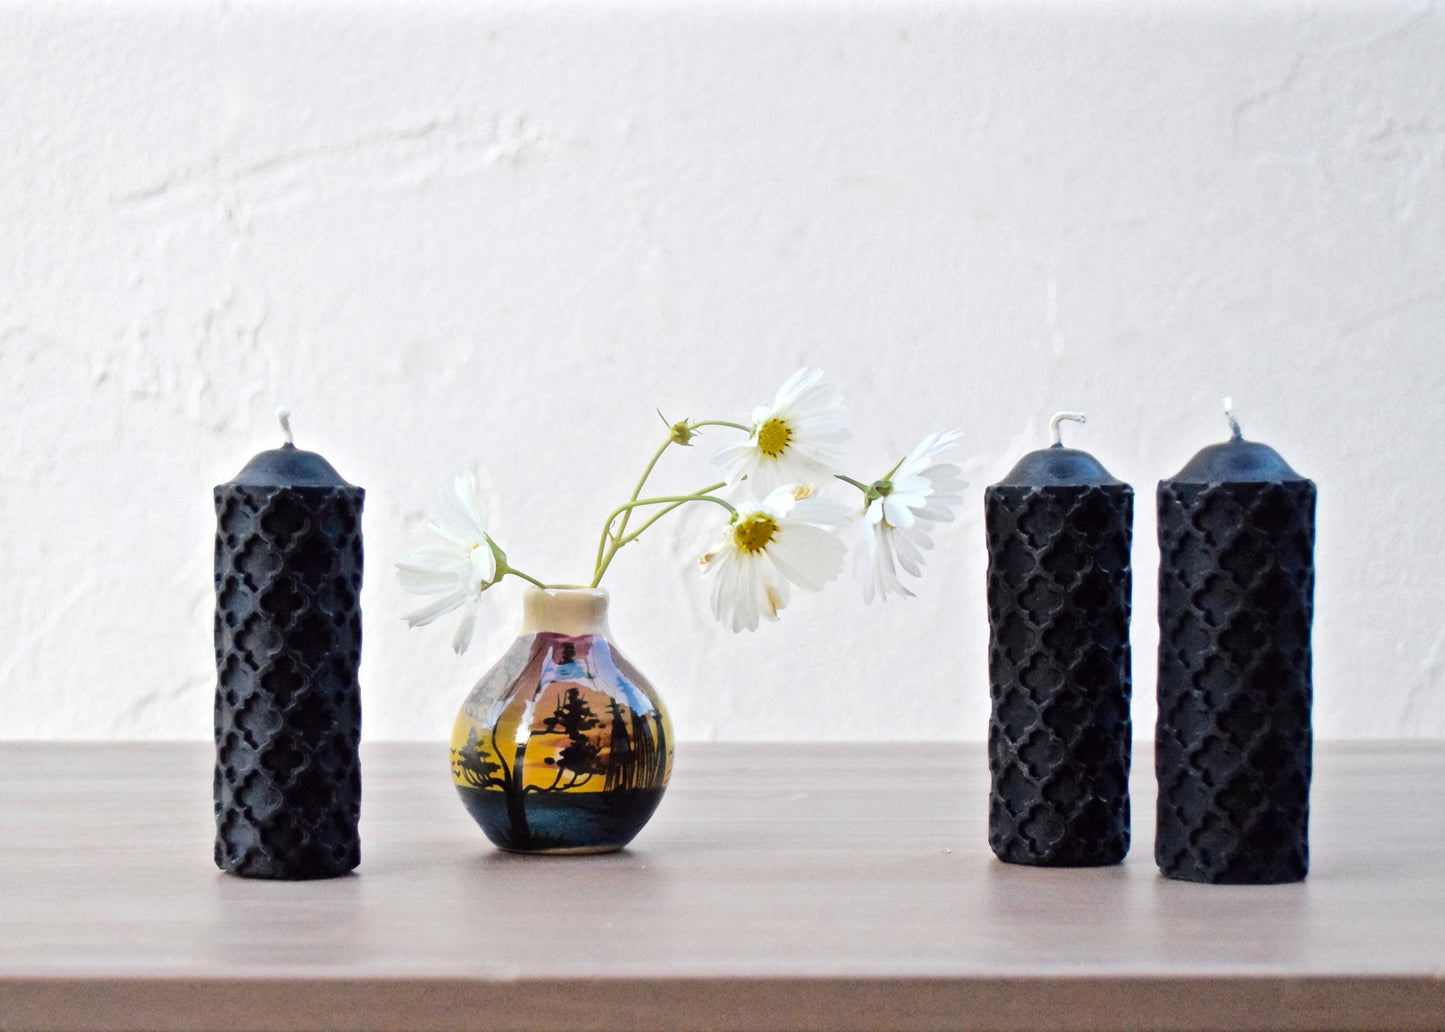 Black Beeswax Candles SET of 4 - Black, Candle, Beeswax, Pillar Candle